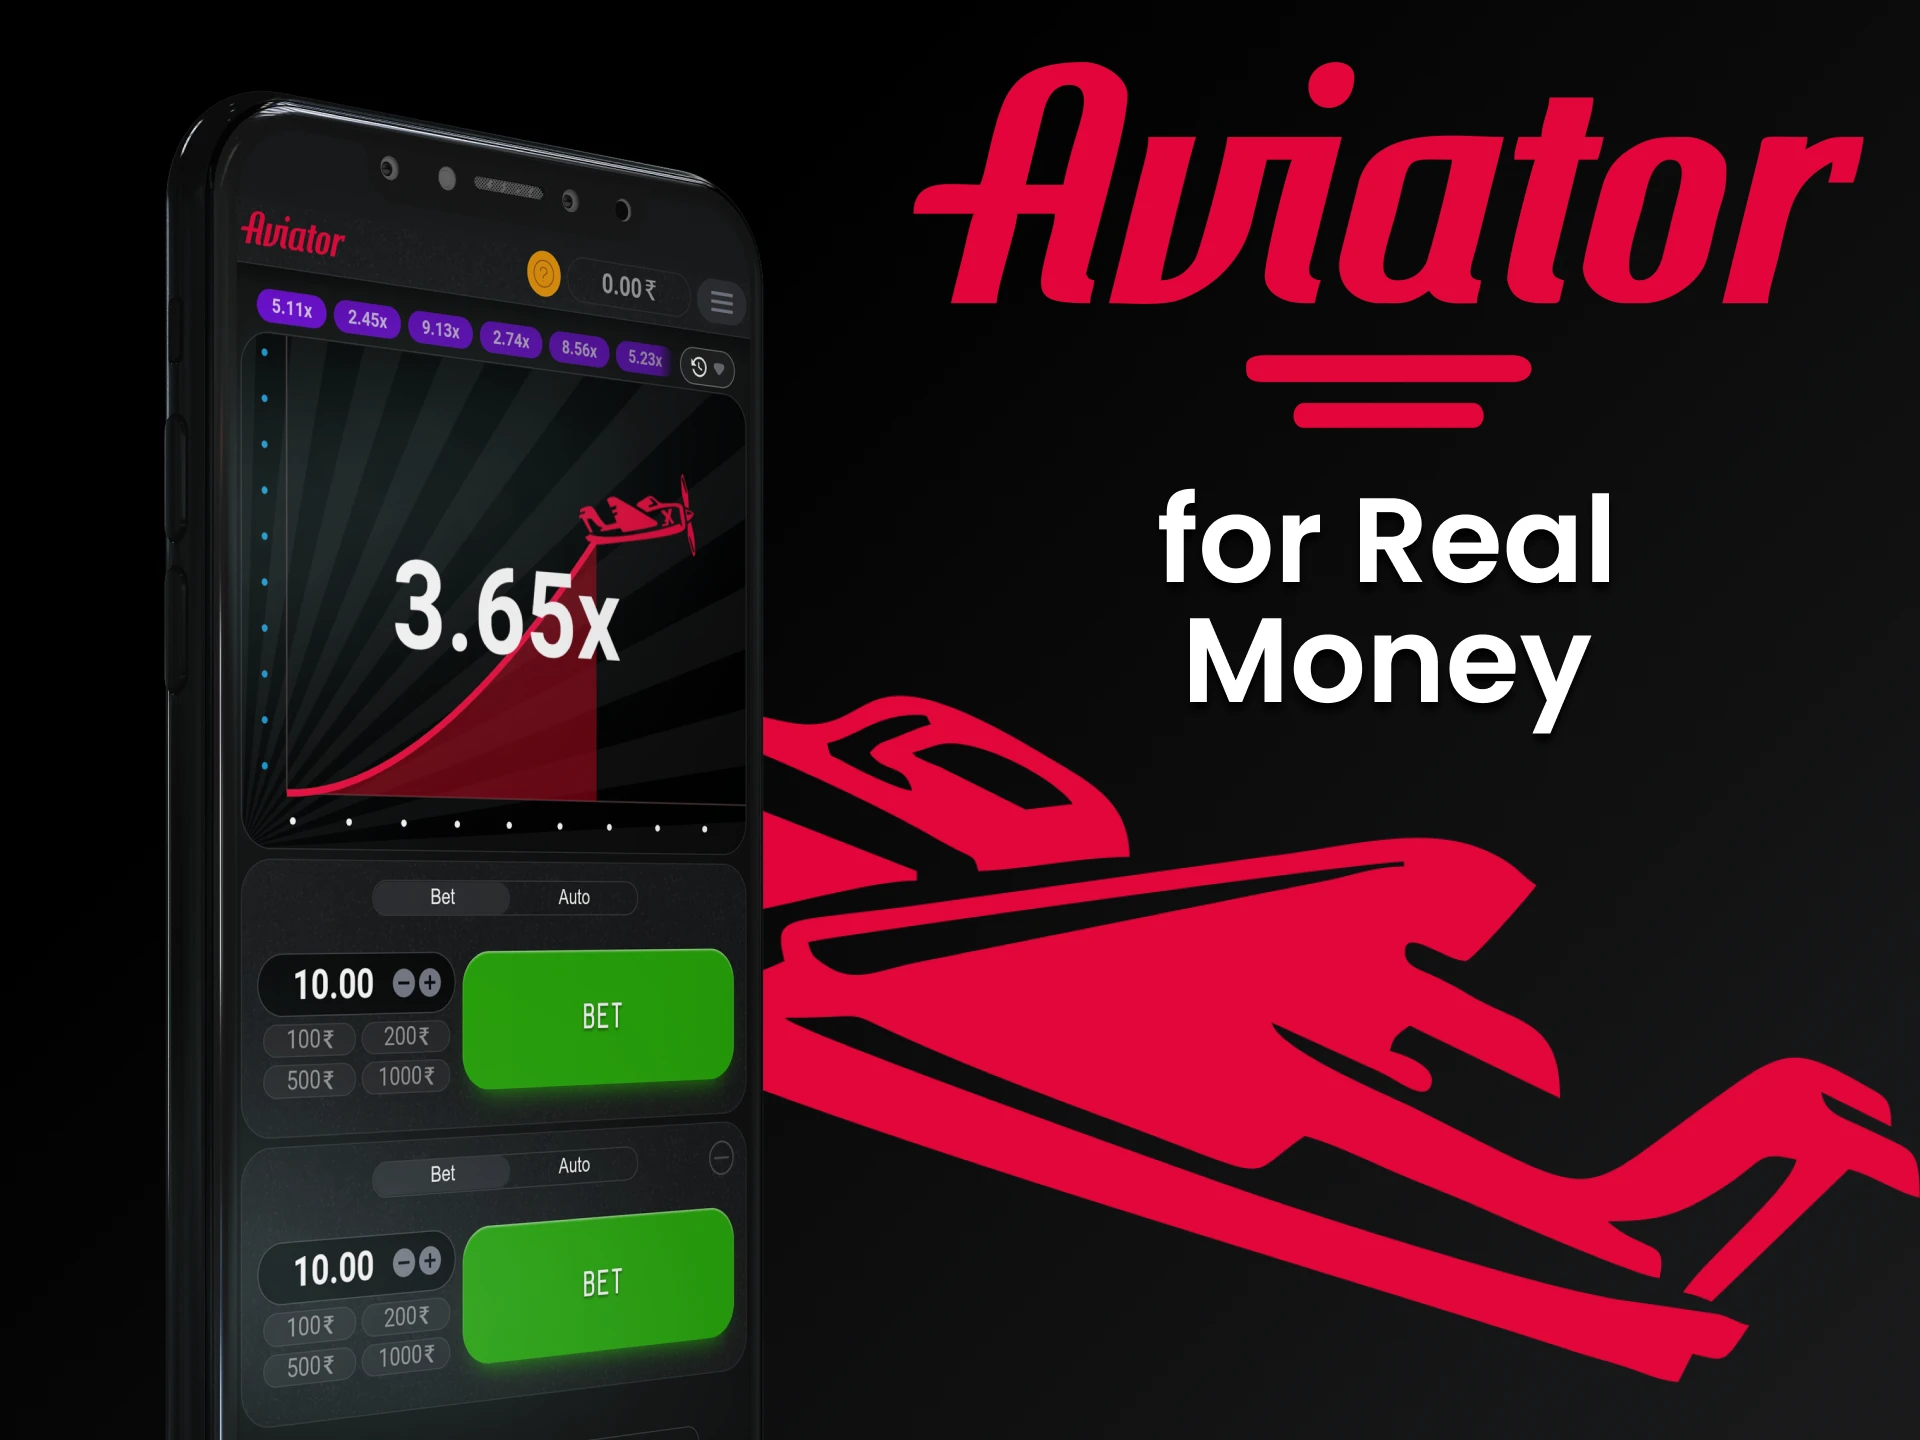 You can play Aviator for real money.